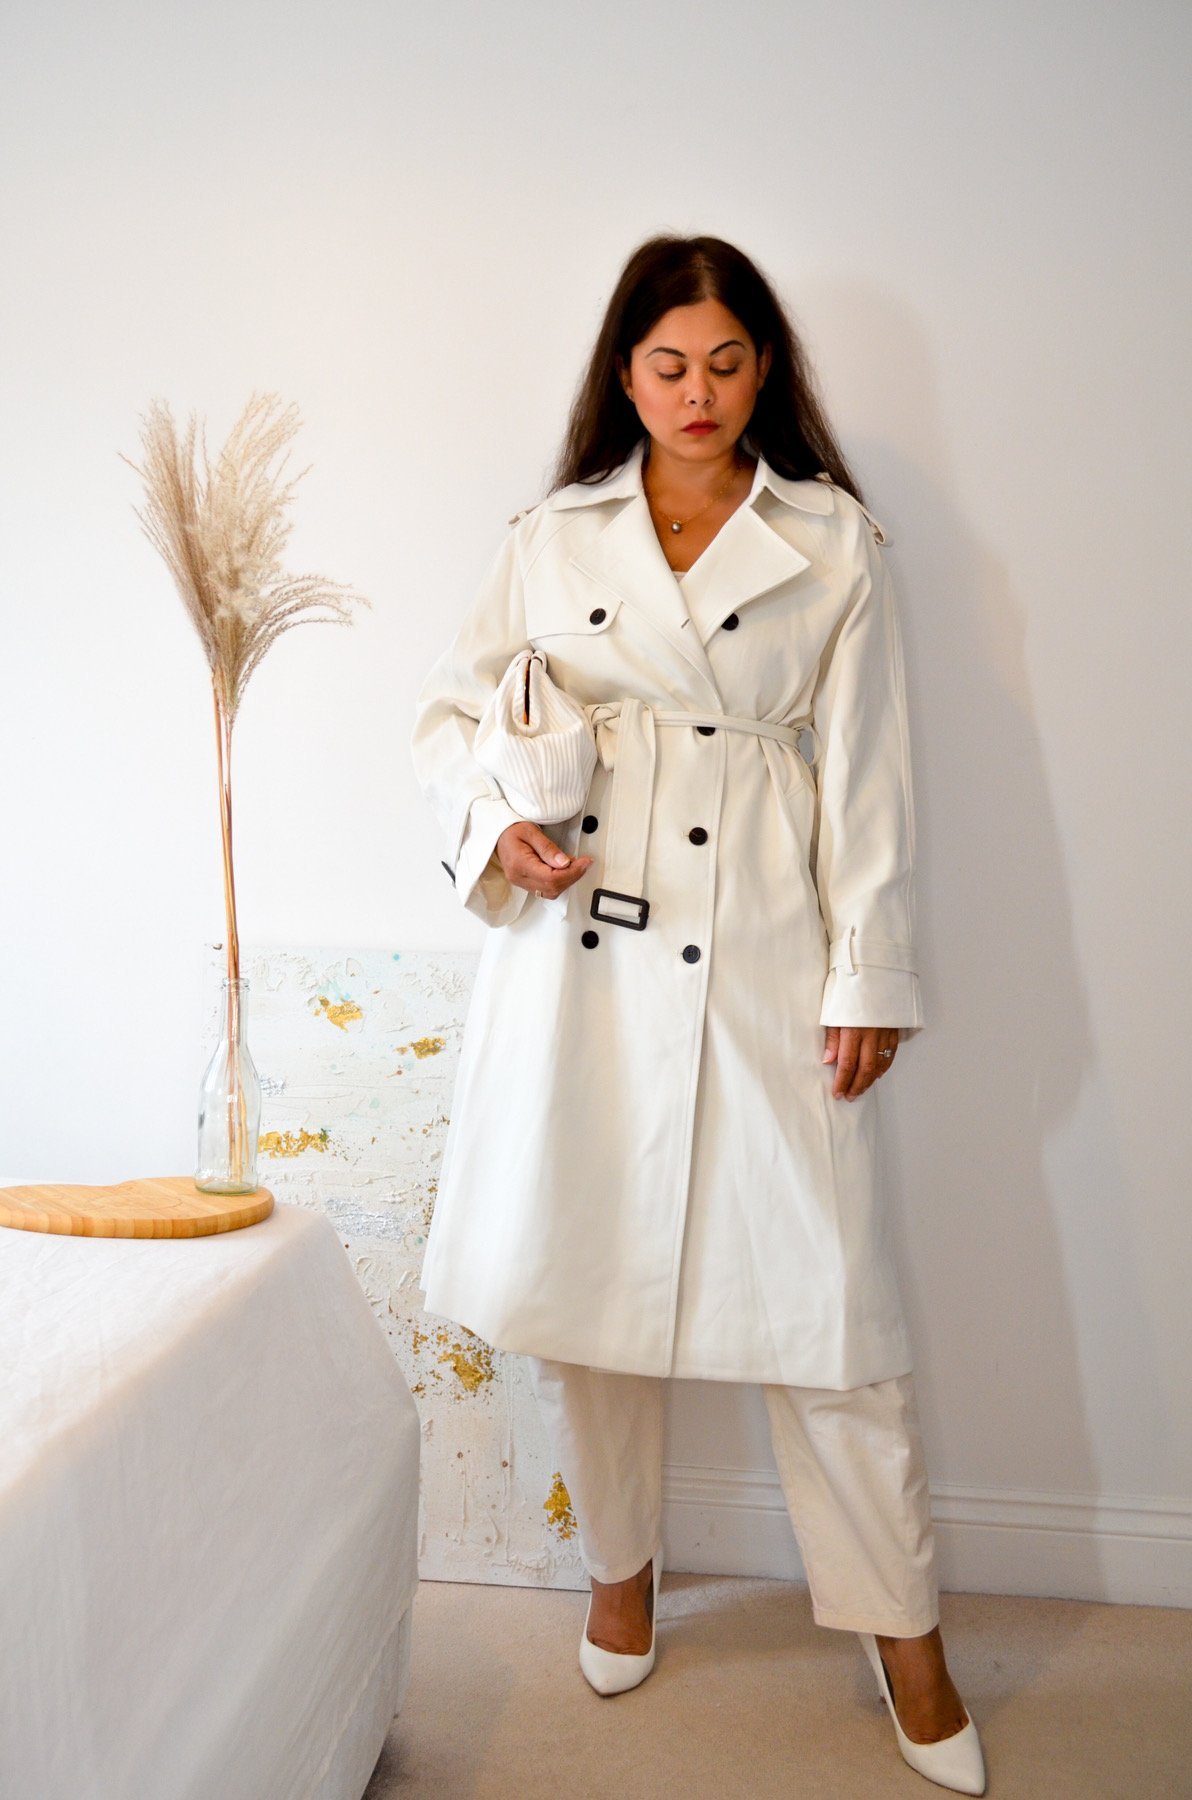 A woman wearing an all white outfit with a white trench coat and white top and trousers for Autumn.